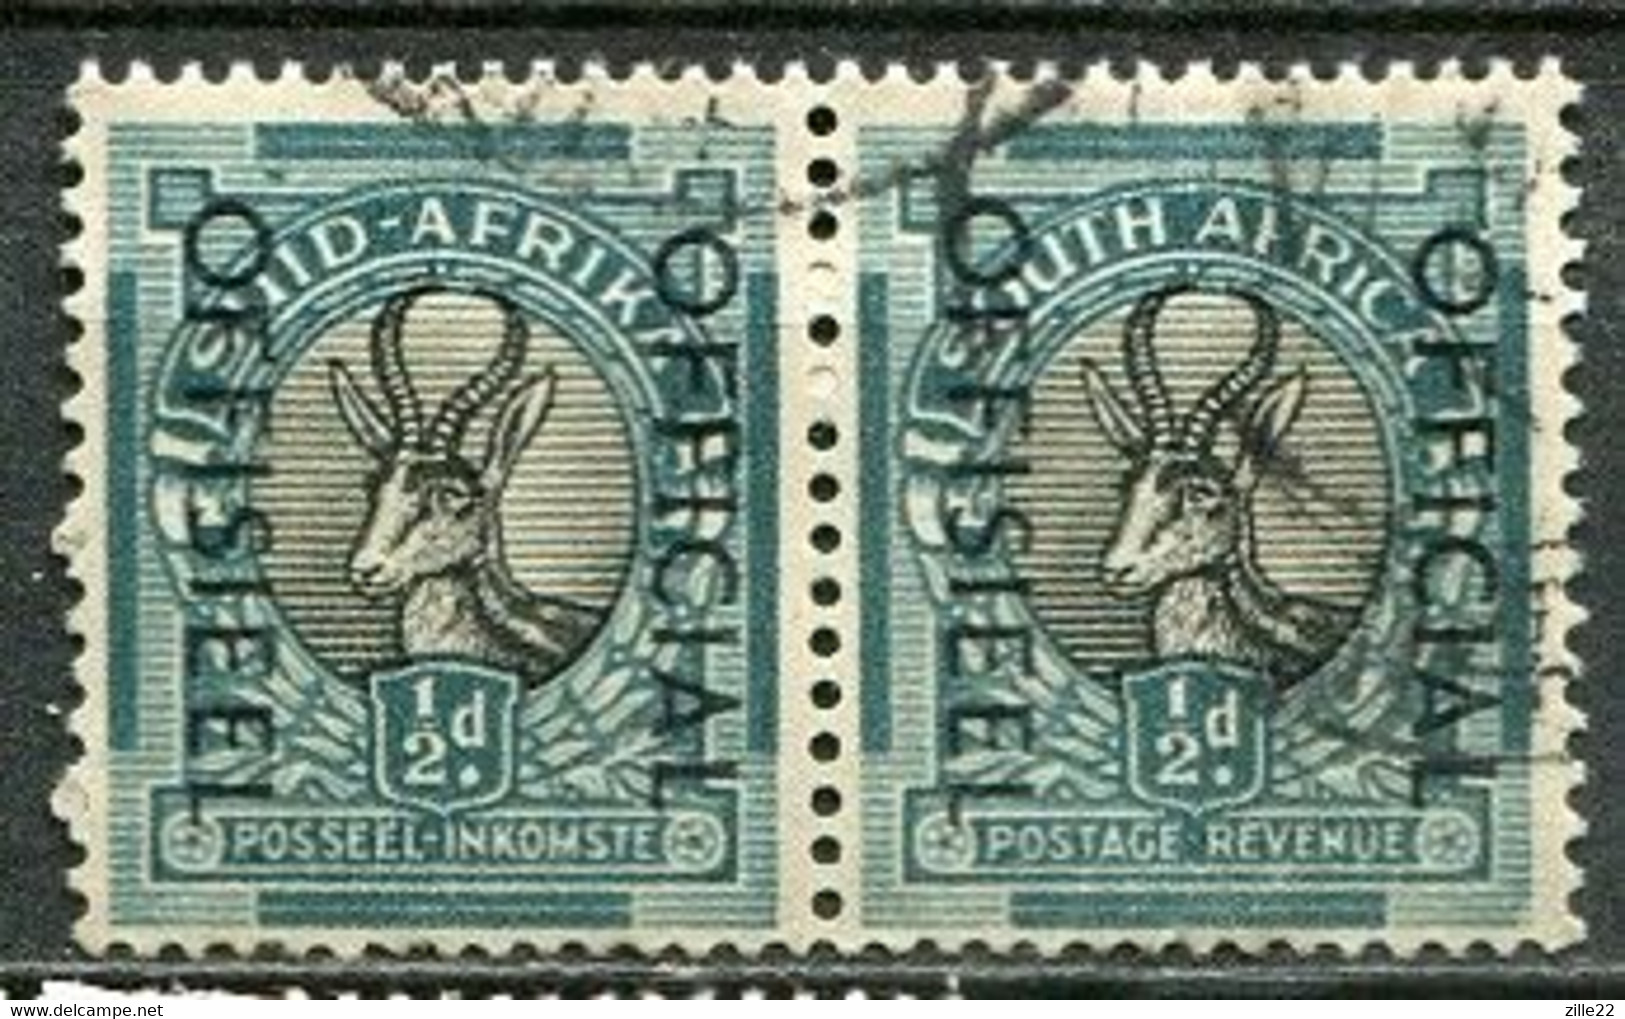 Union Of South Africa Official, Südafrika Dienst Mi# 74-5 Gestempelt/used - Oficiales